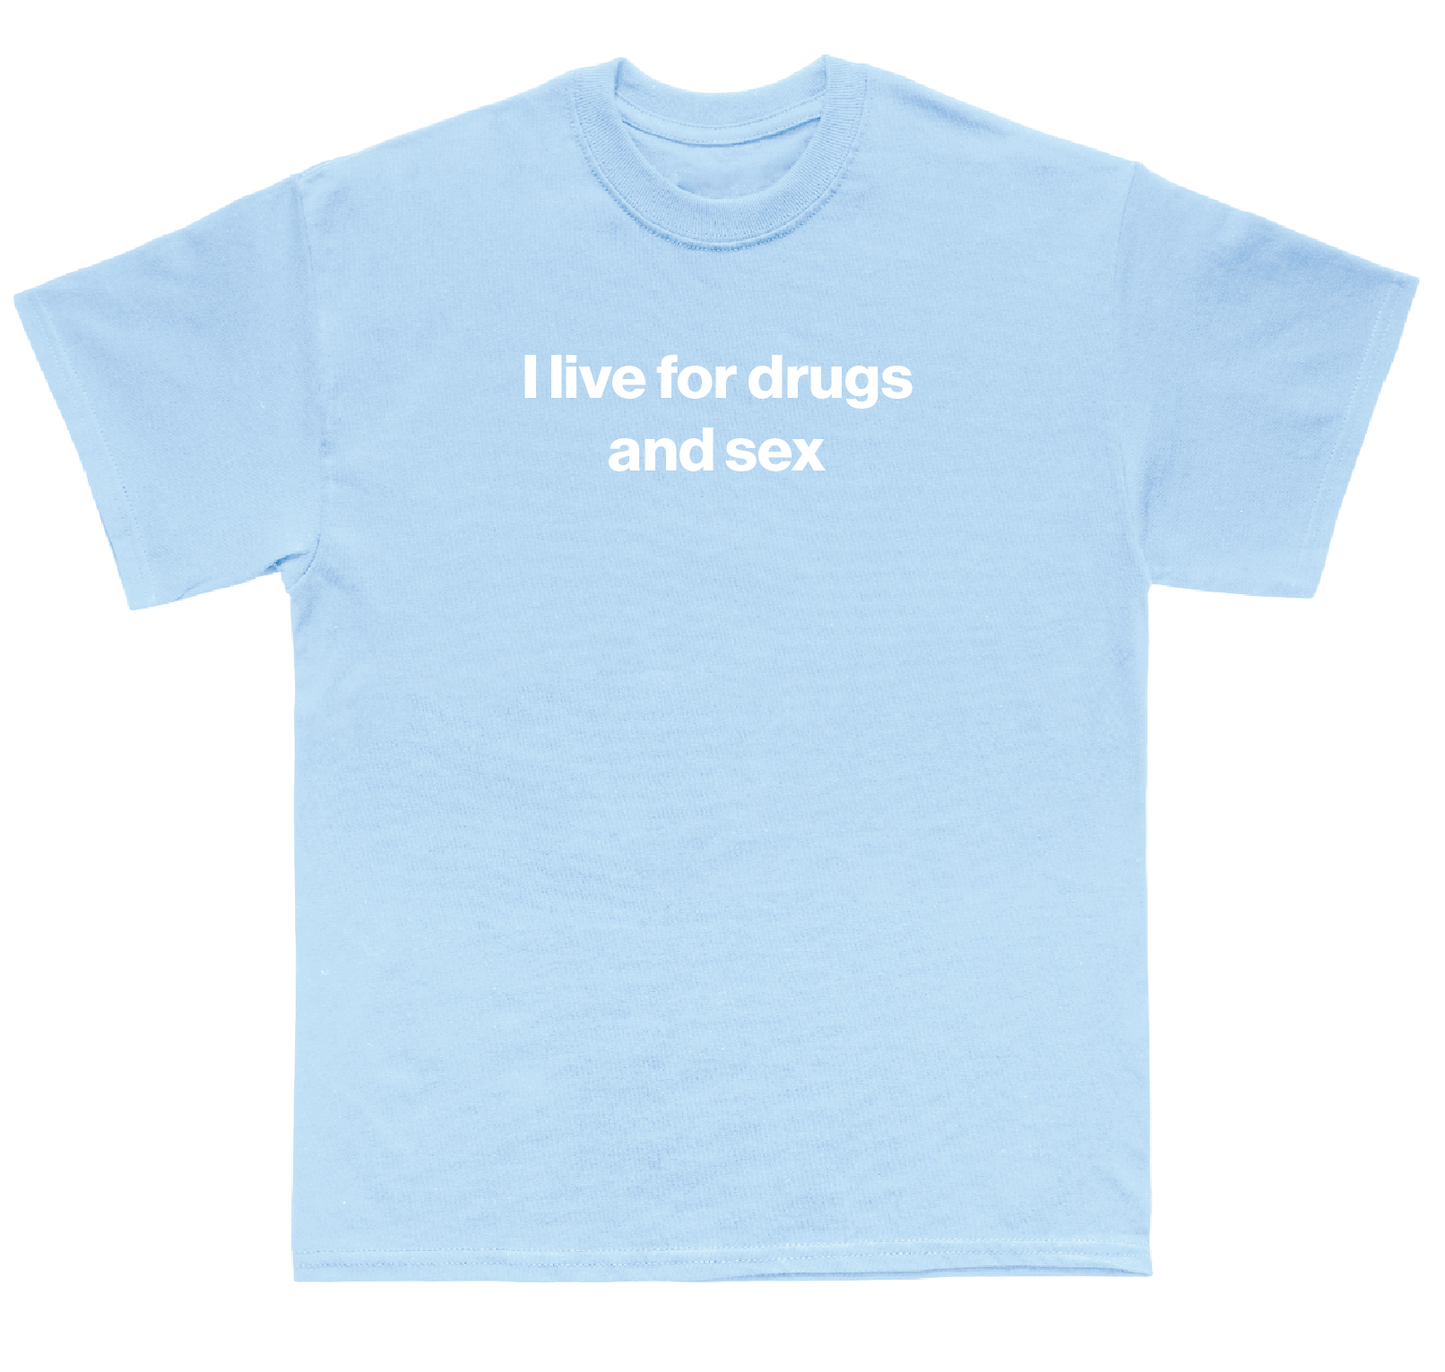 I live for drugs and sex shirt